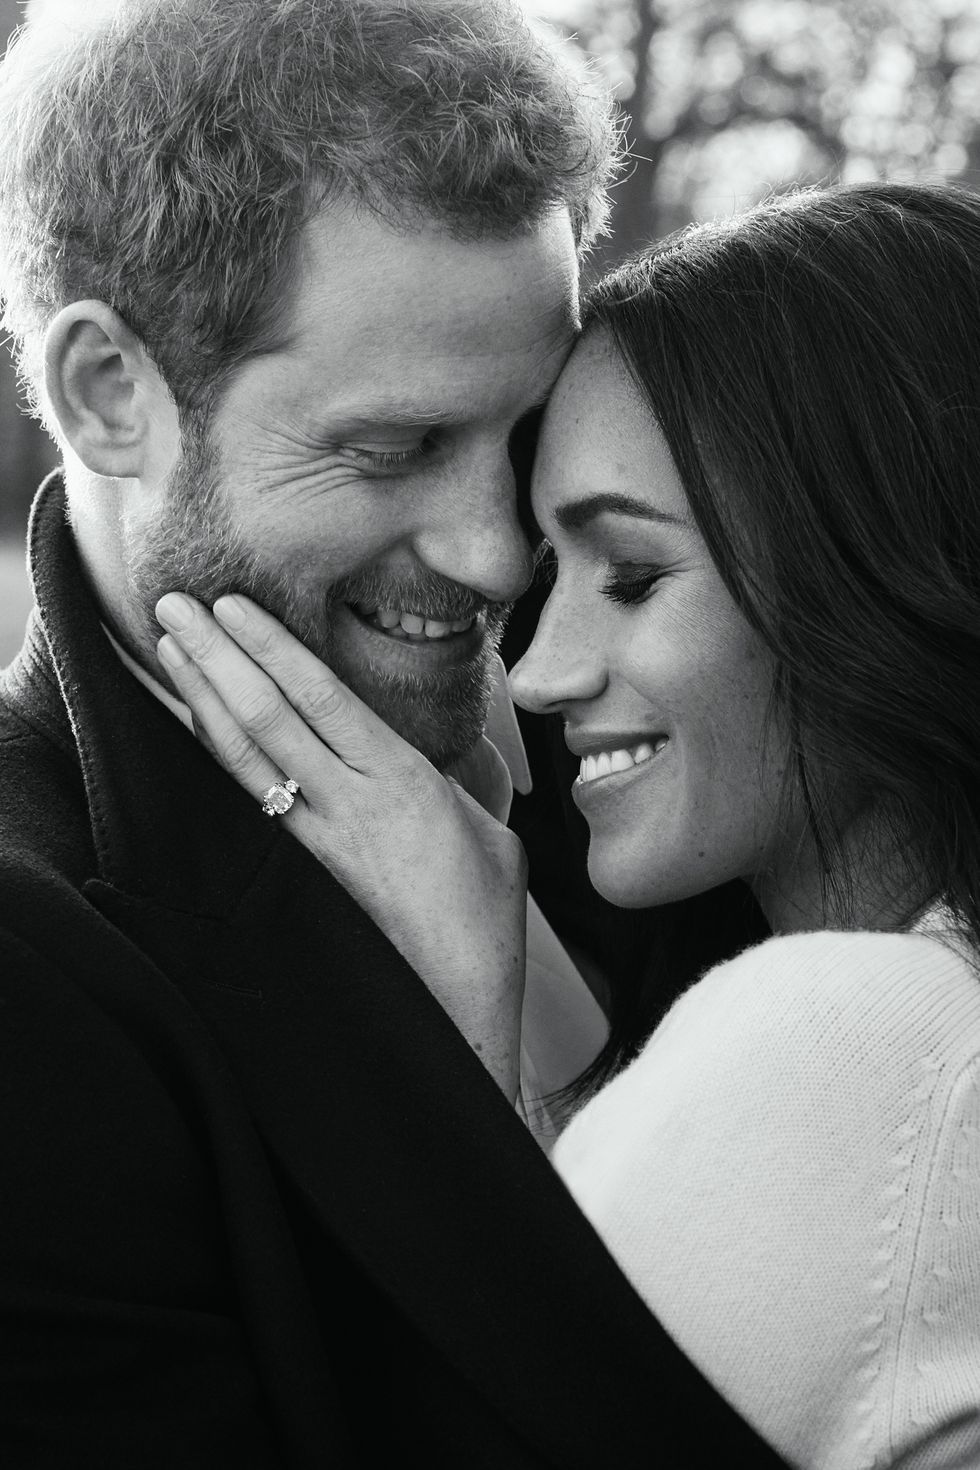 https://hips.hearstapps.com/hmg-prod.s3.amazonaws.com/images/hbz-prince-harry-meghan-markle-cute-moments-gettyimages-896535688-1523378905.jpg?crop=1xw:1xh;center,top